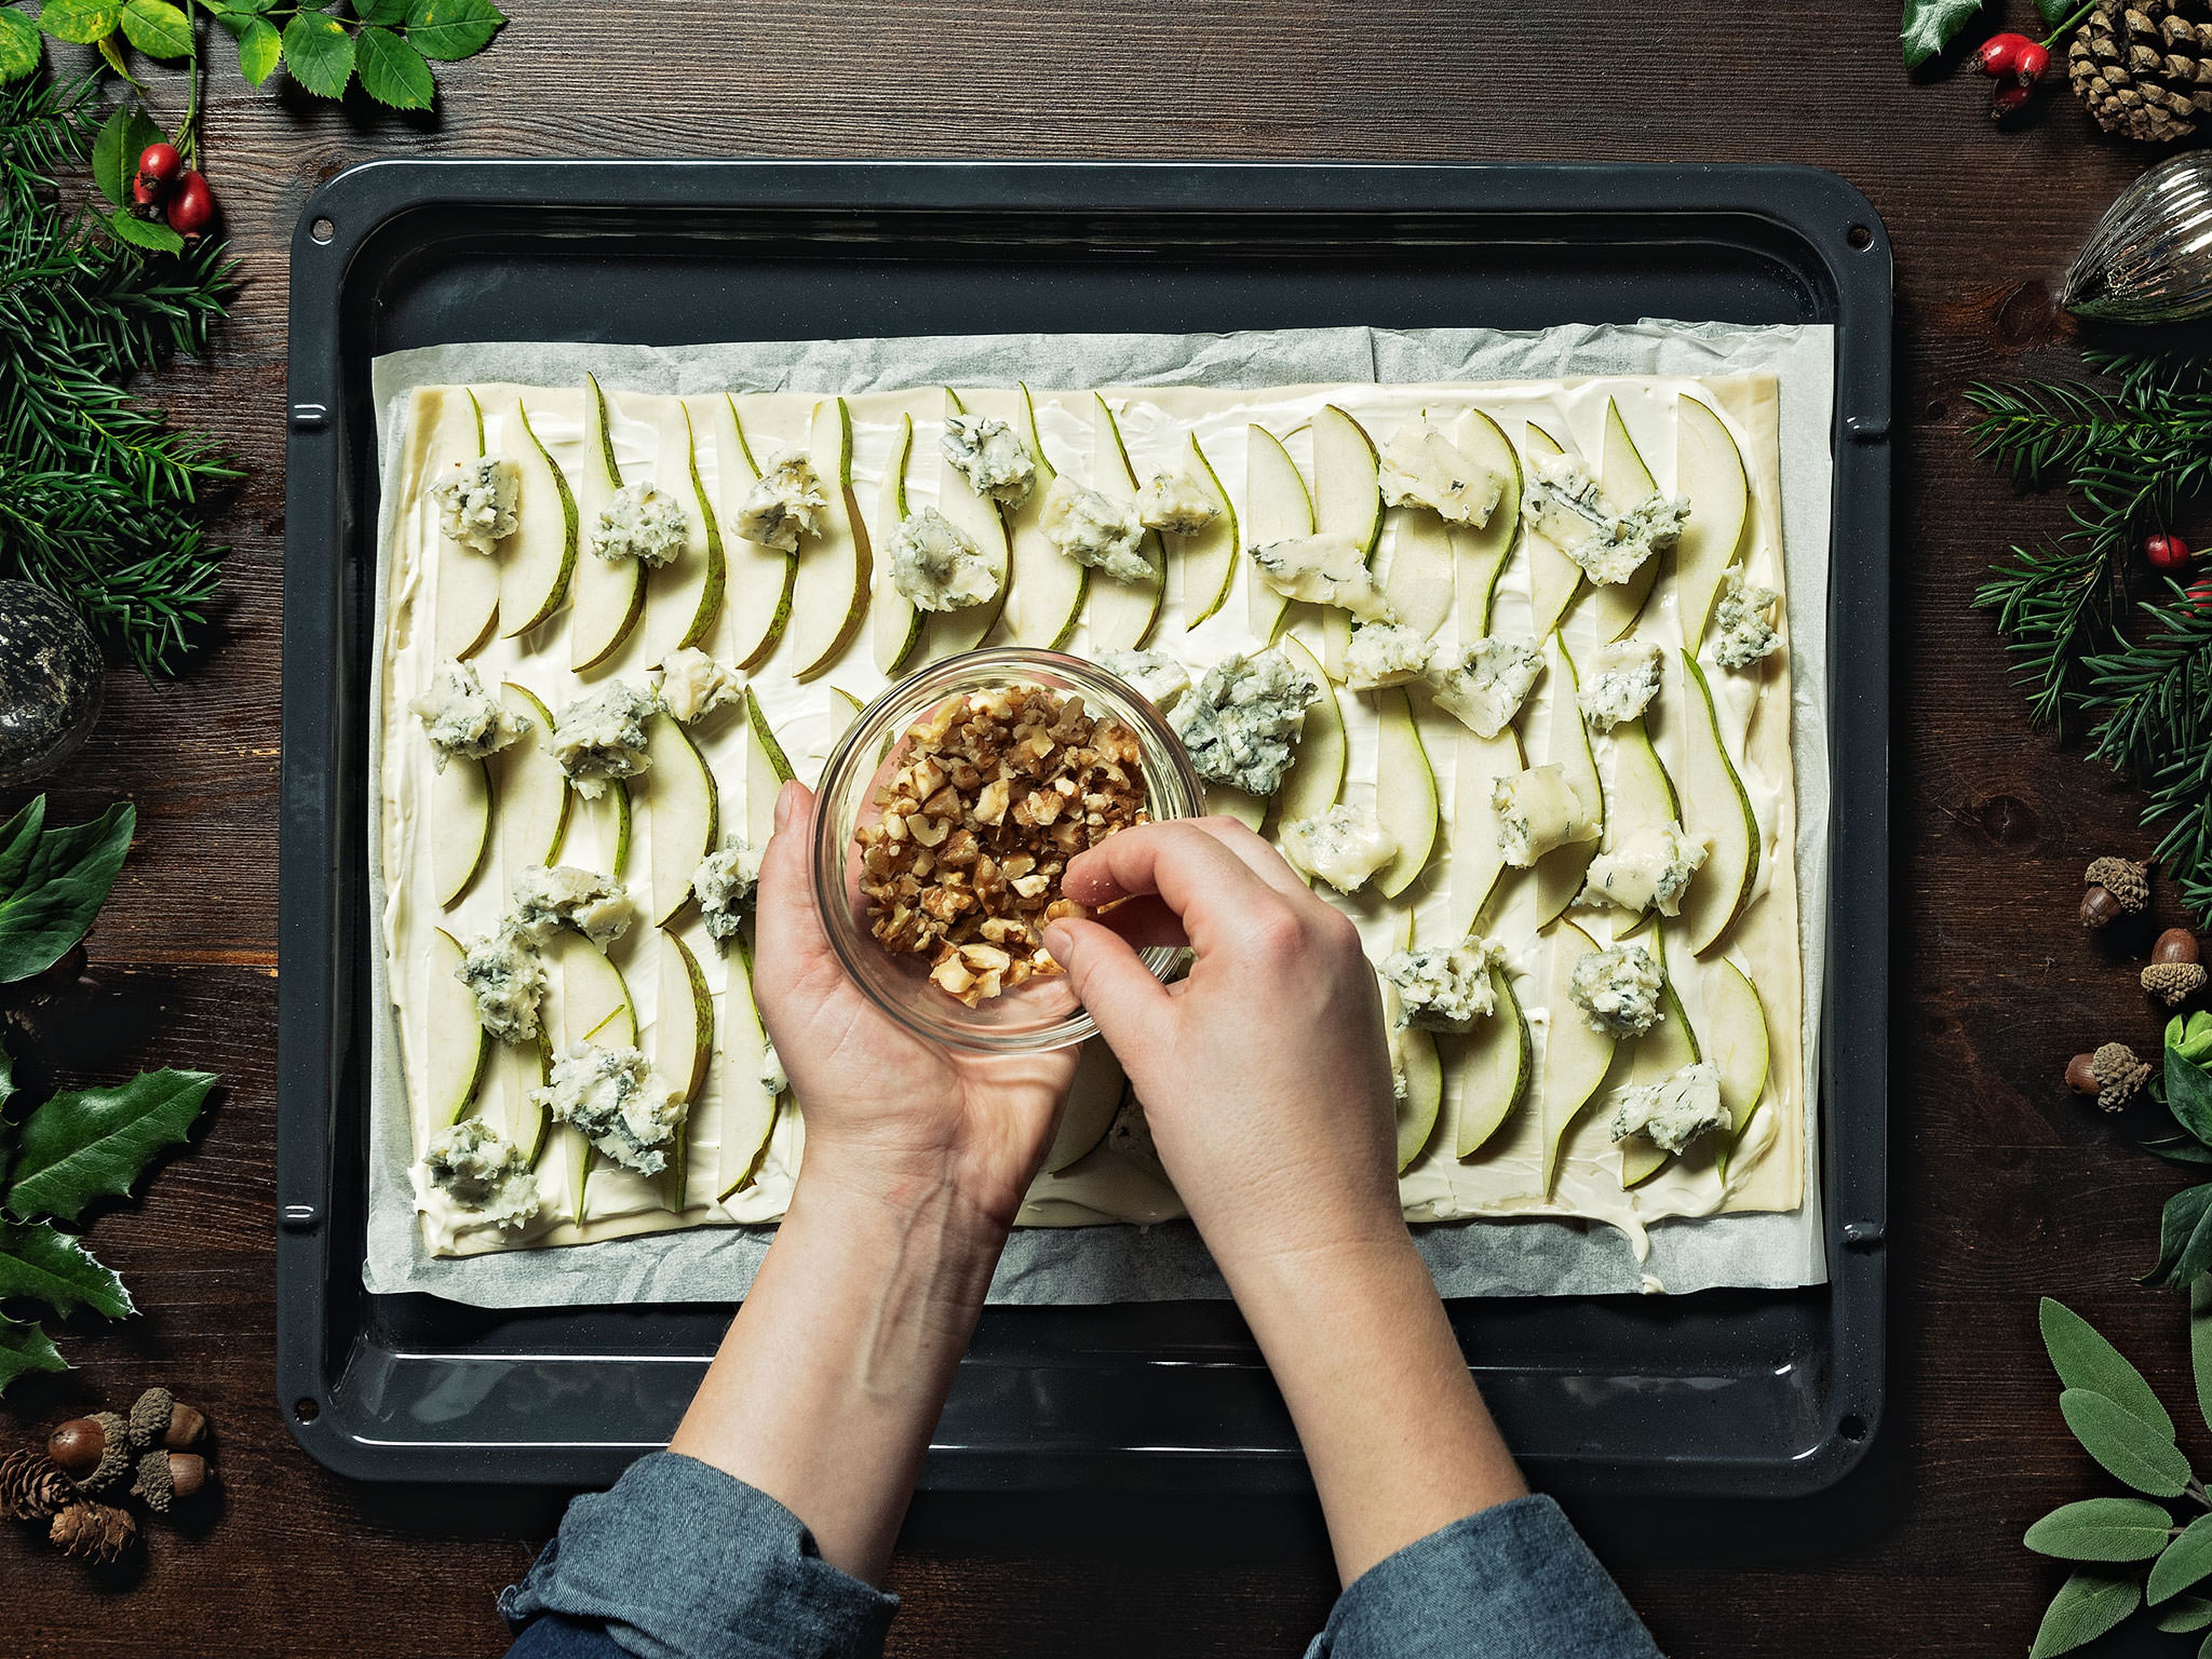 Spread the pastry onto a baking sheet lined with baking paper. Distribute the creme fraiche evenly over it. Spread the pears onto the pastry and, using your hands, crumble the Gorgonzola over the top. Sprinkle with walnuts and thyme, season with salt and pepper, and drizzle with honey.